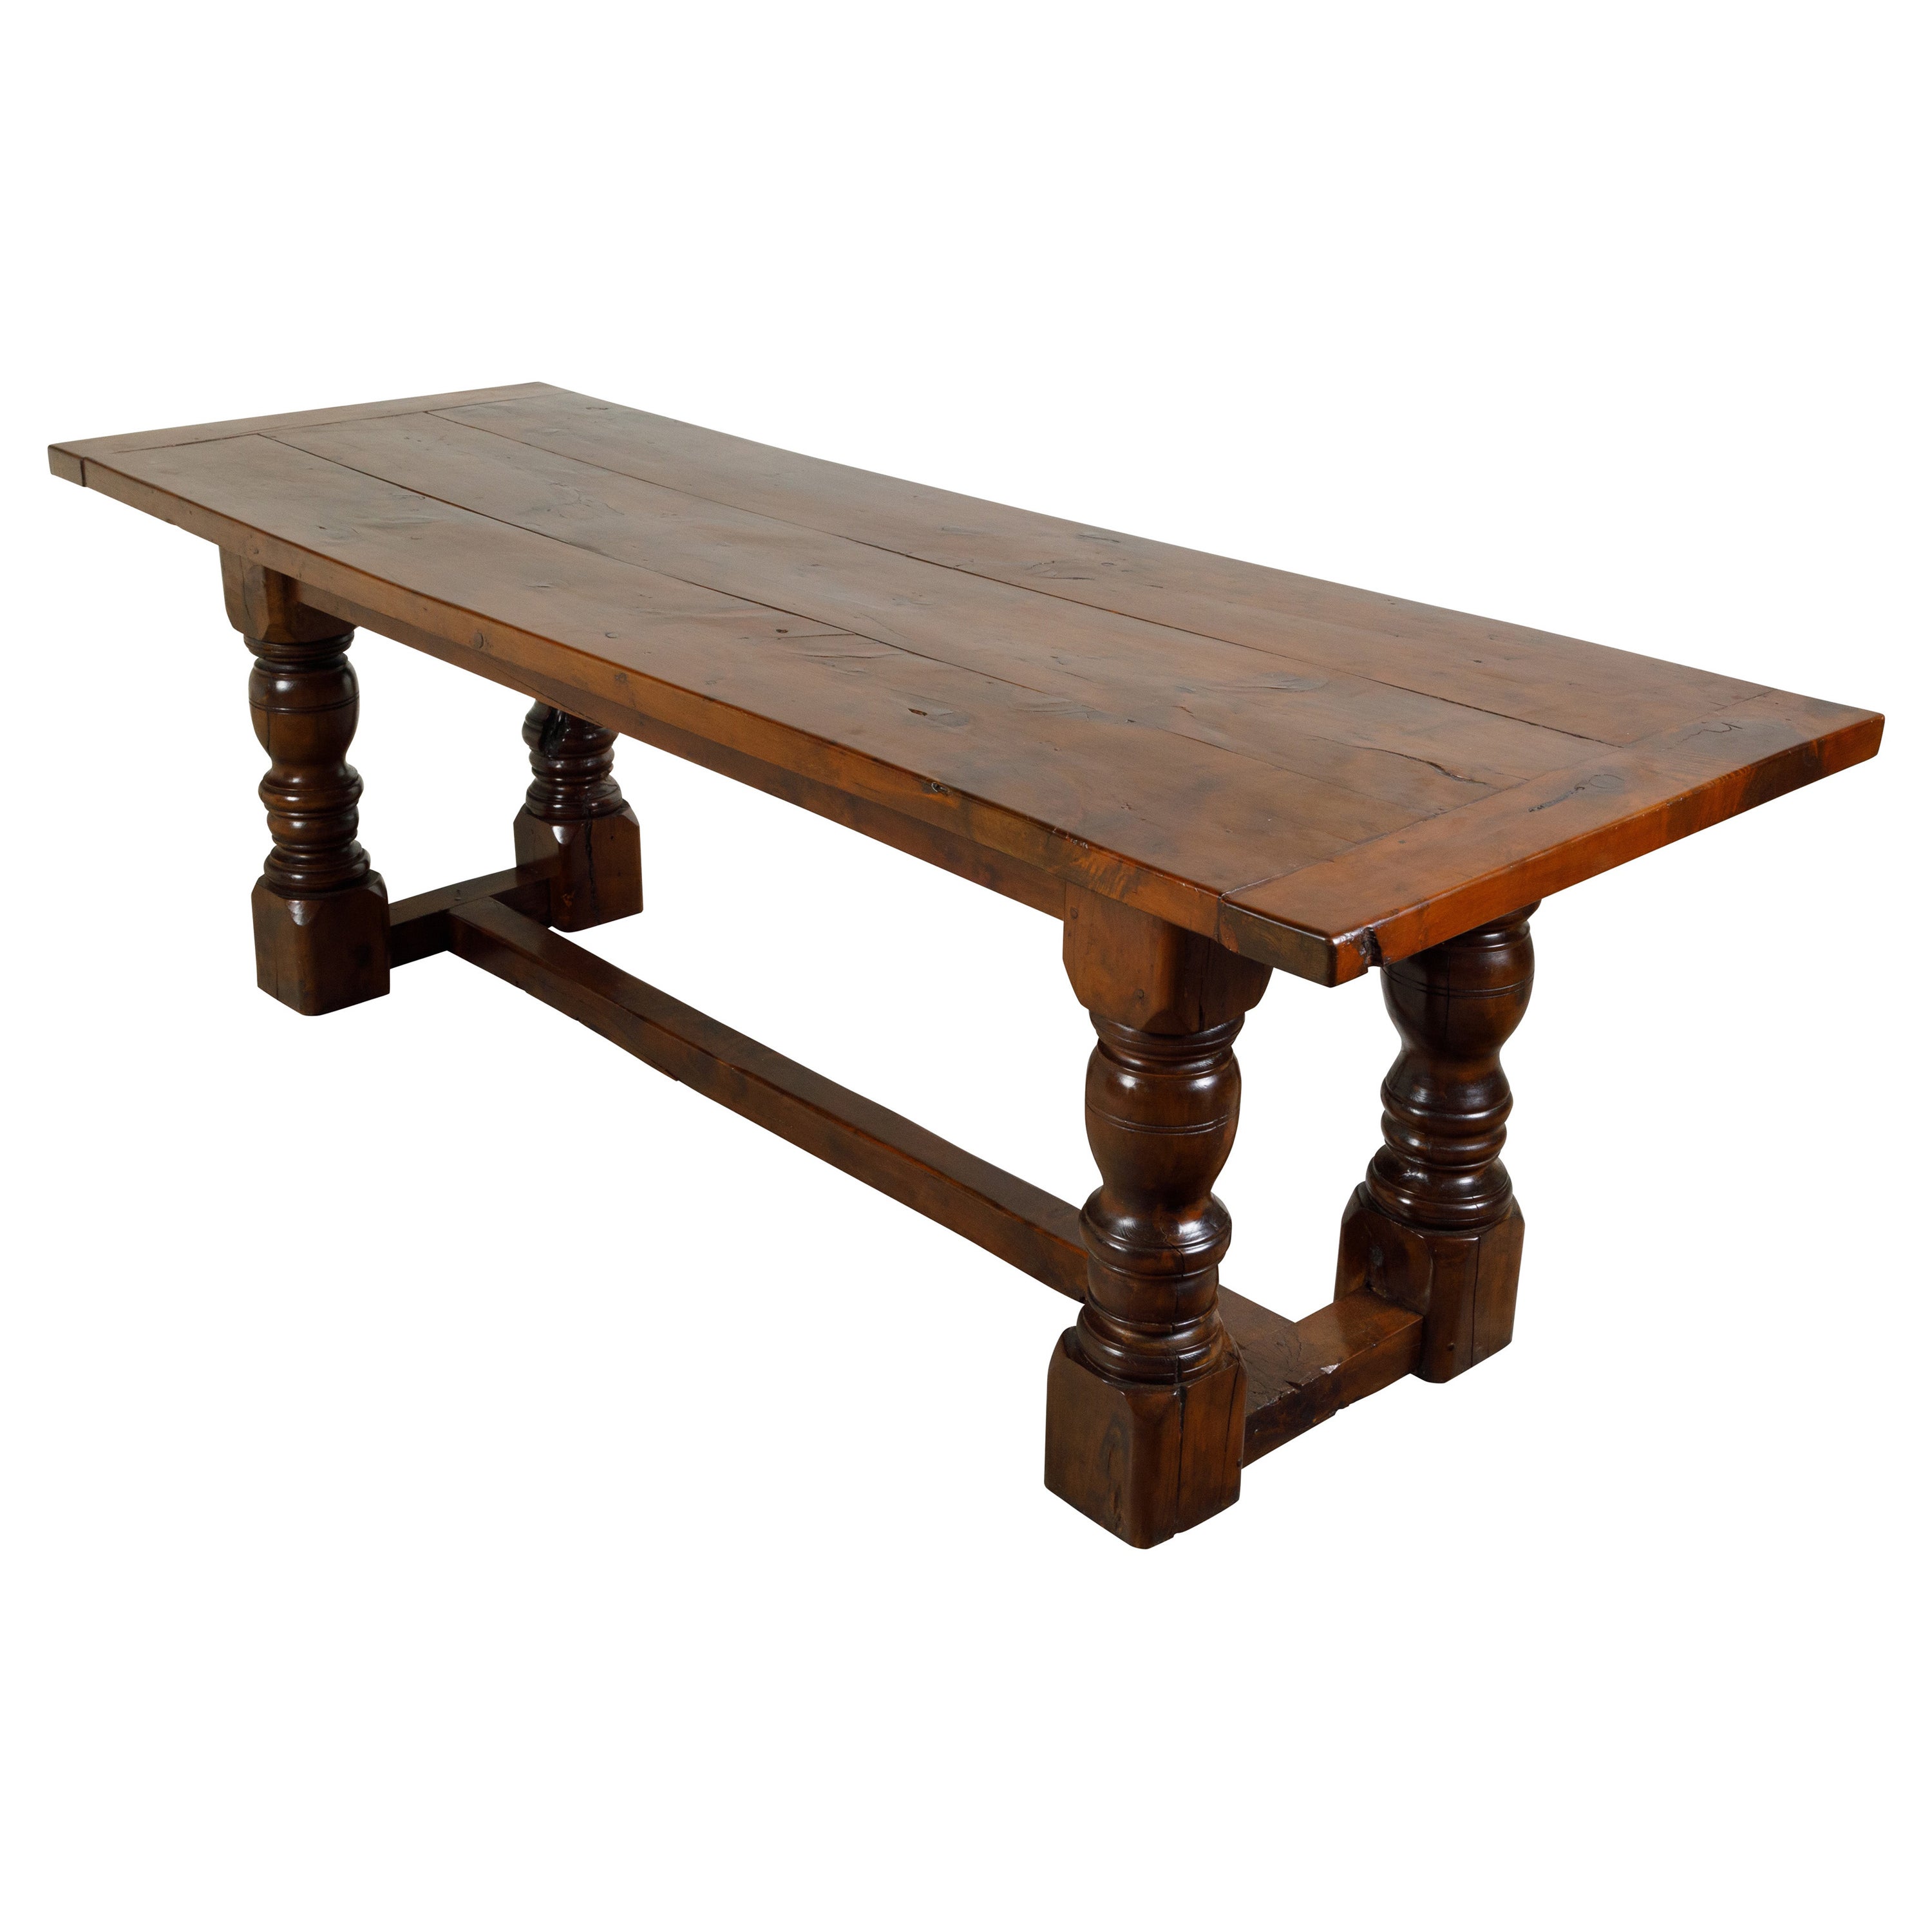 English 19th Century Walnut Dining Table with Turned Legs and H-Form Stretcher For Sale